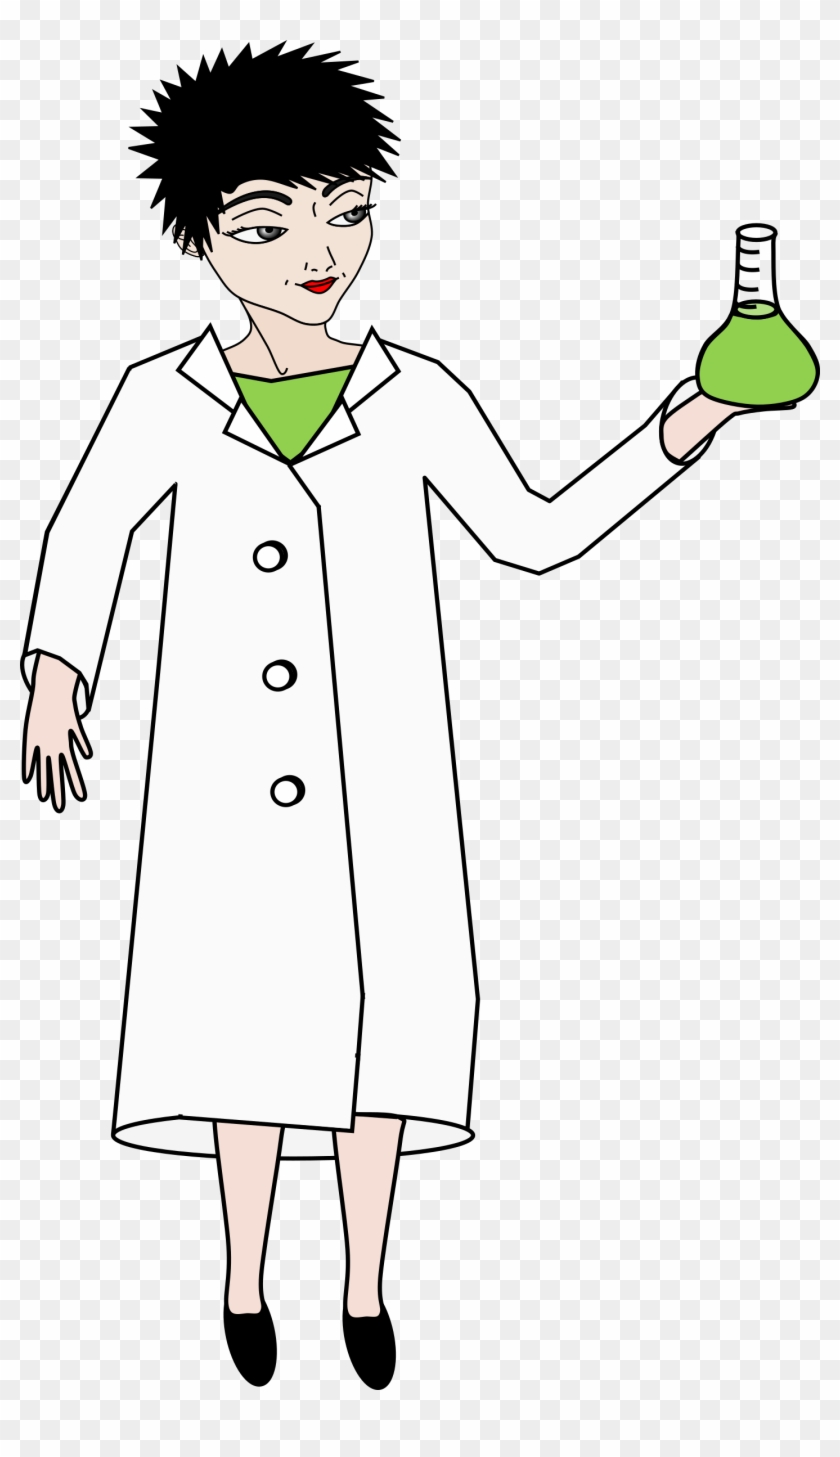 Science Student With Spiky Hair Big Image - Scientist Clip Art - Png Download #2292182